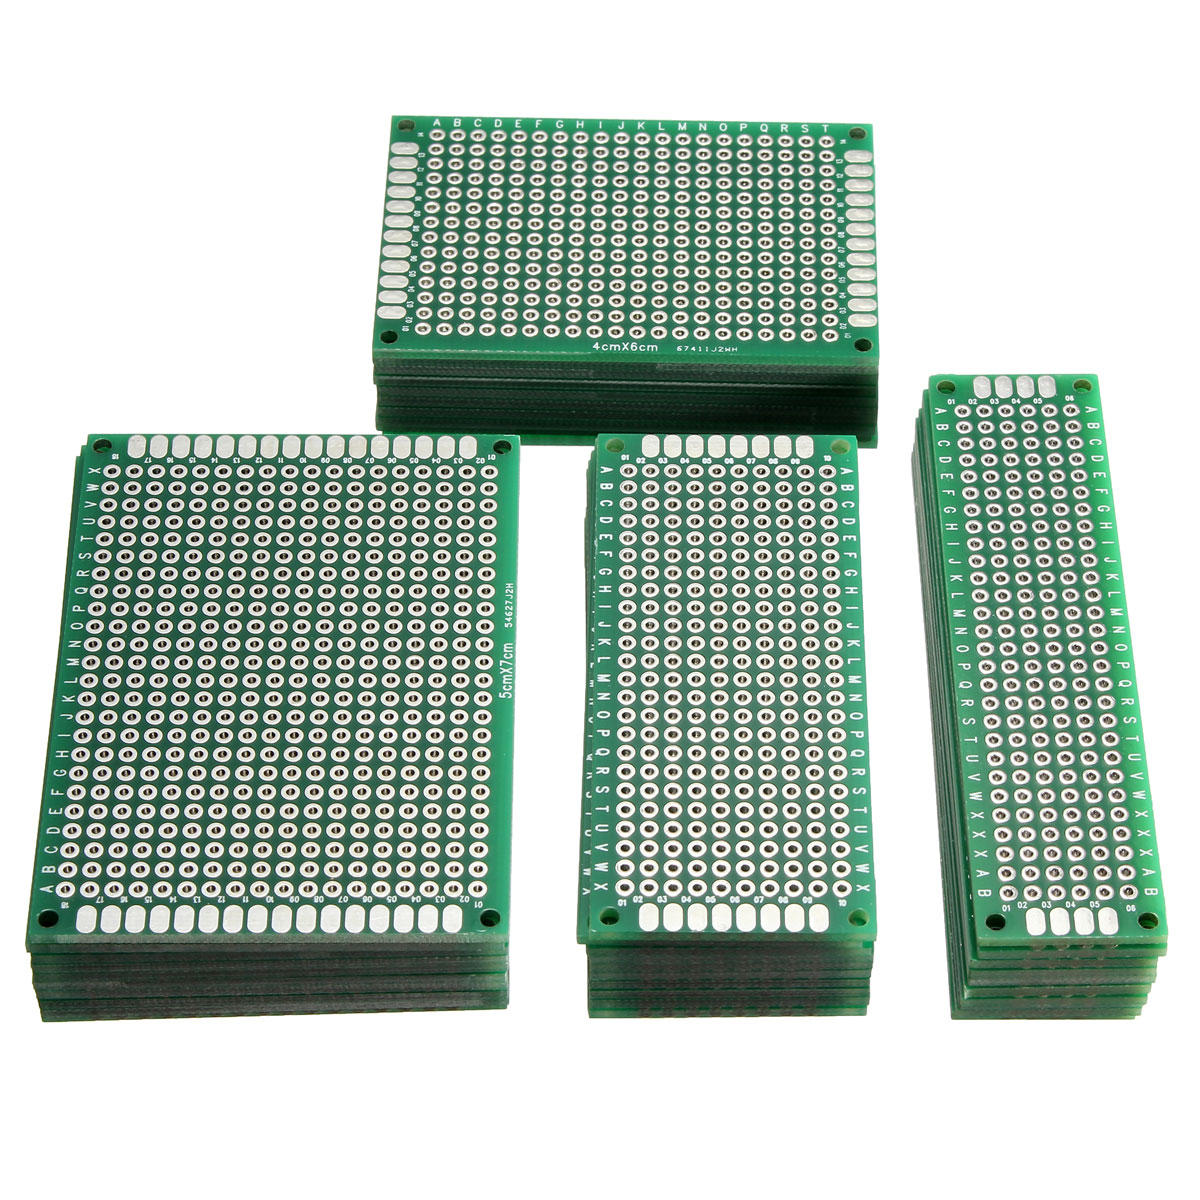 Geekcreit® 80pcs FR-4 2.54mm Double Side Prototype PCB Printed Circuit Board